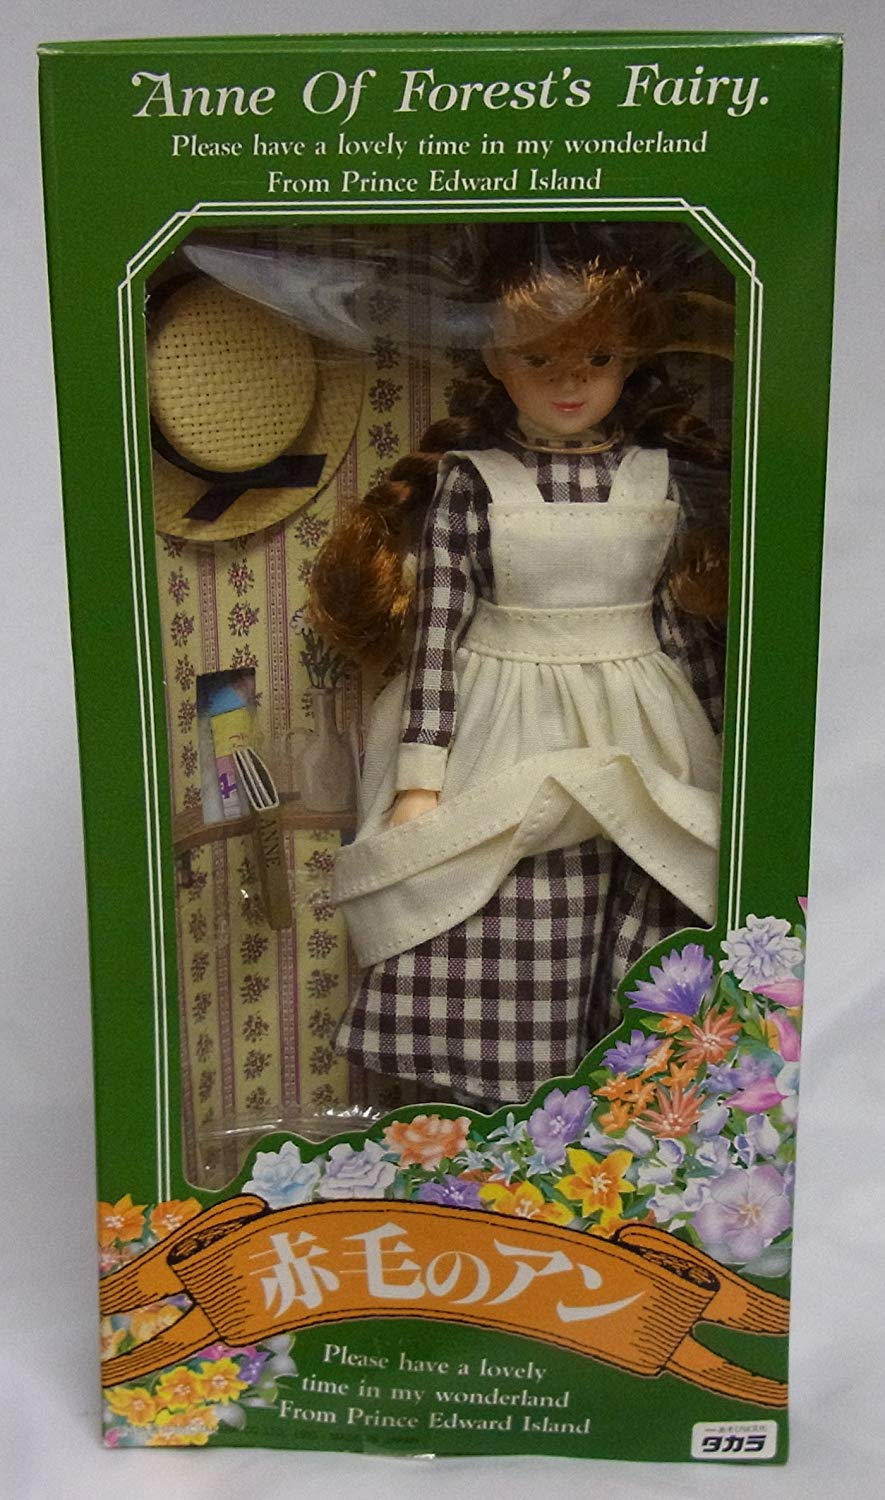 Takara Tomy Fashion Doll - Red Haired Anne - Anne of the Forest's Fairy (Takara Tomy)